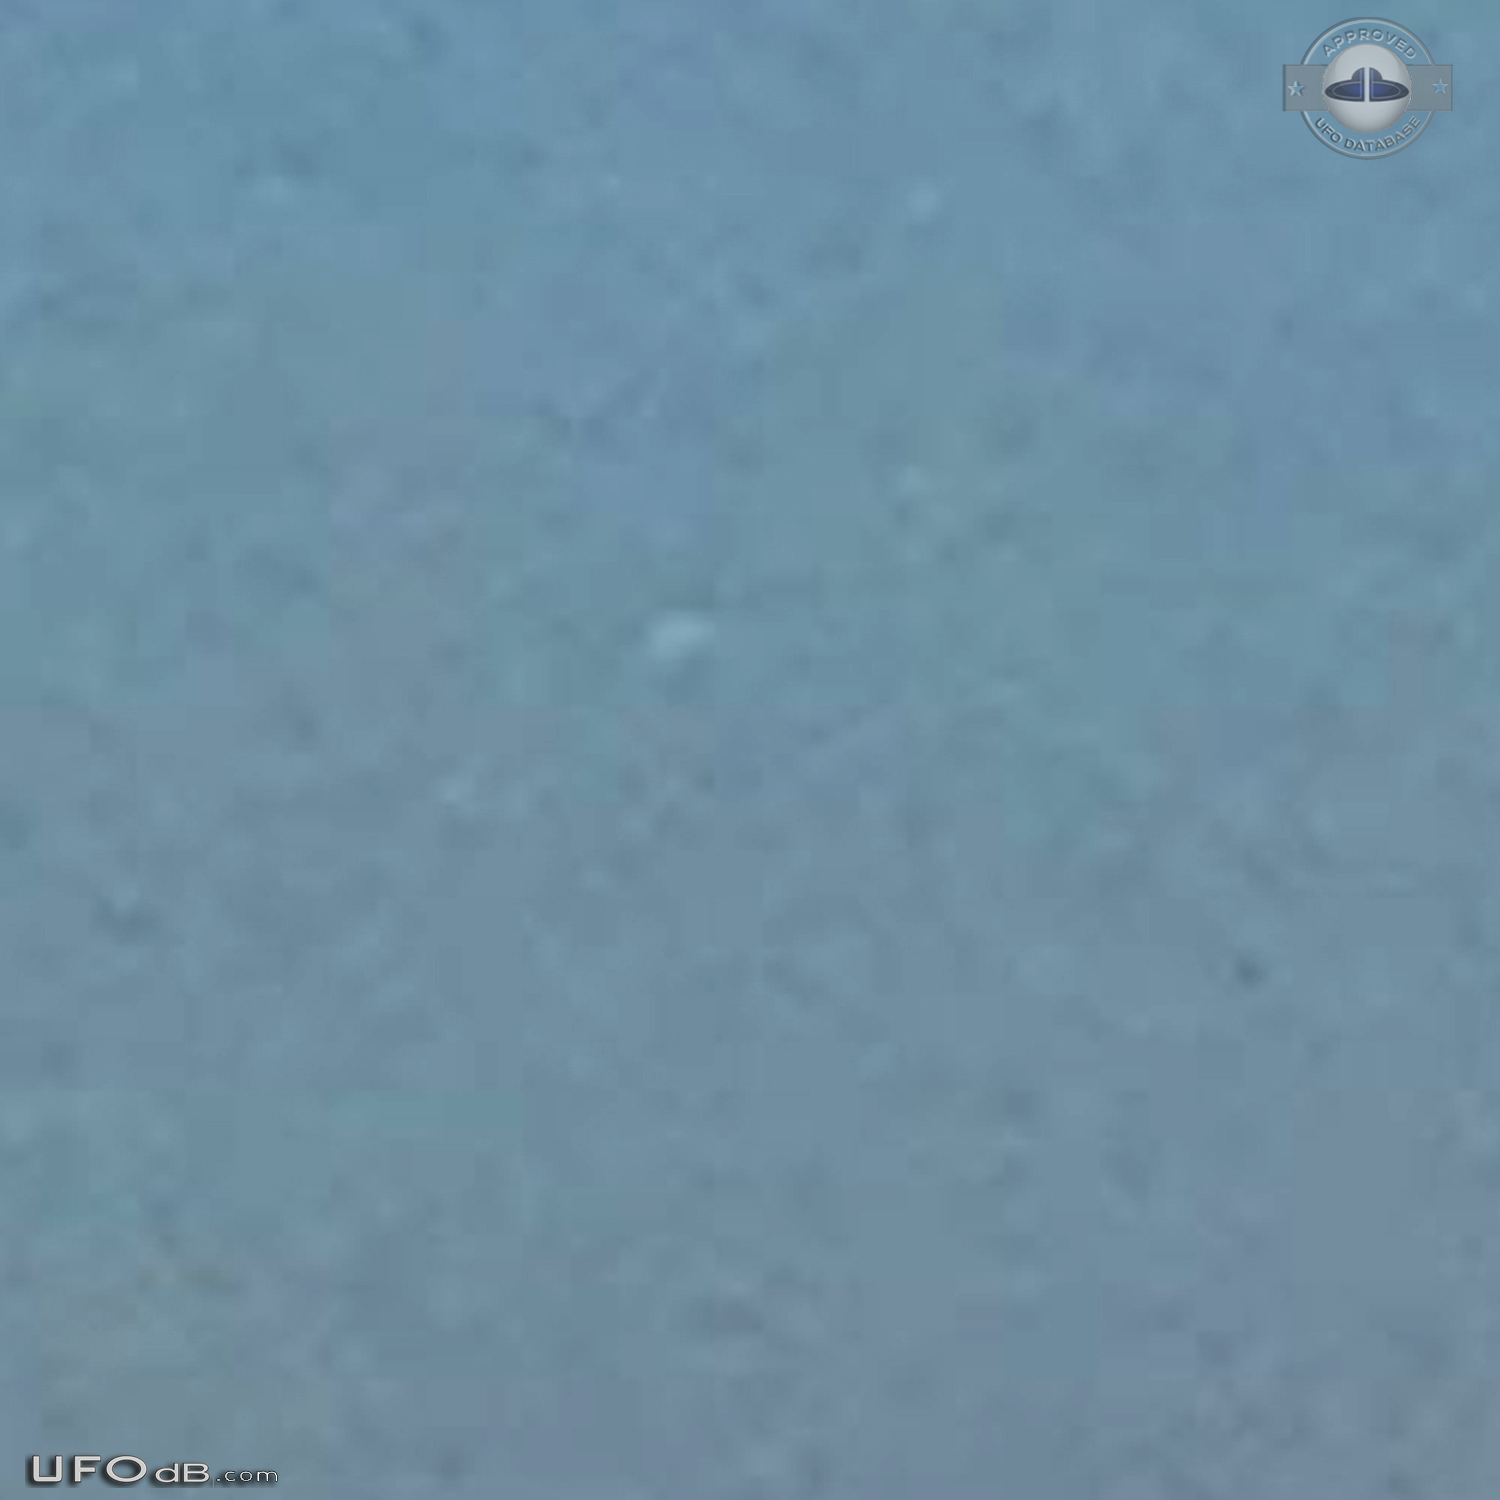 UFO is stationary above a walmart over Ponce in Puerto Rico March 2015 UFO Picture #667-4